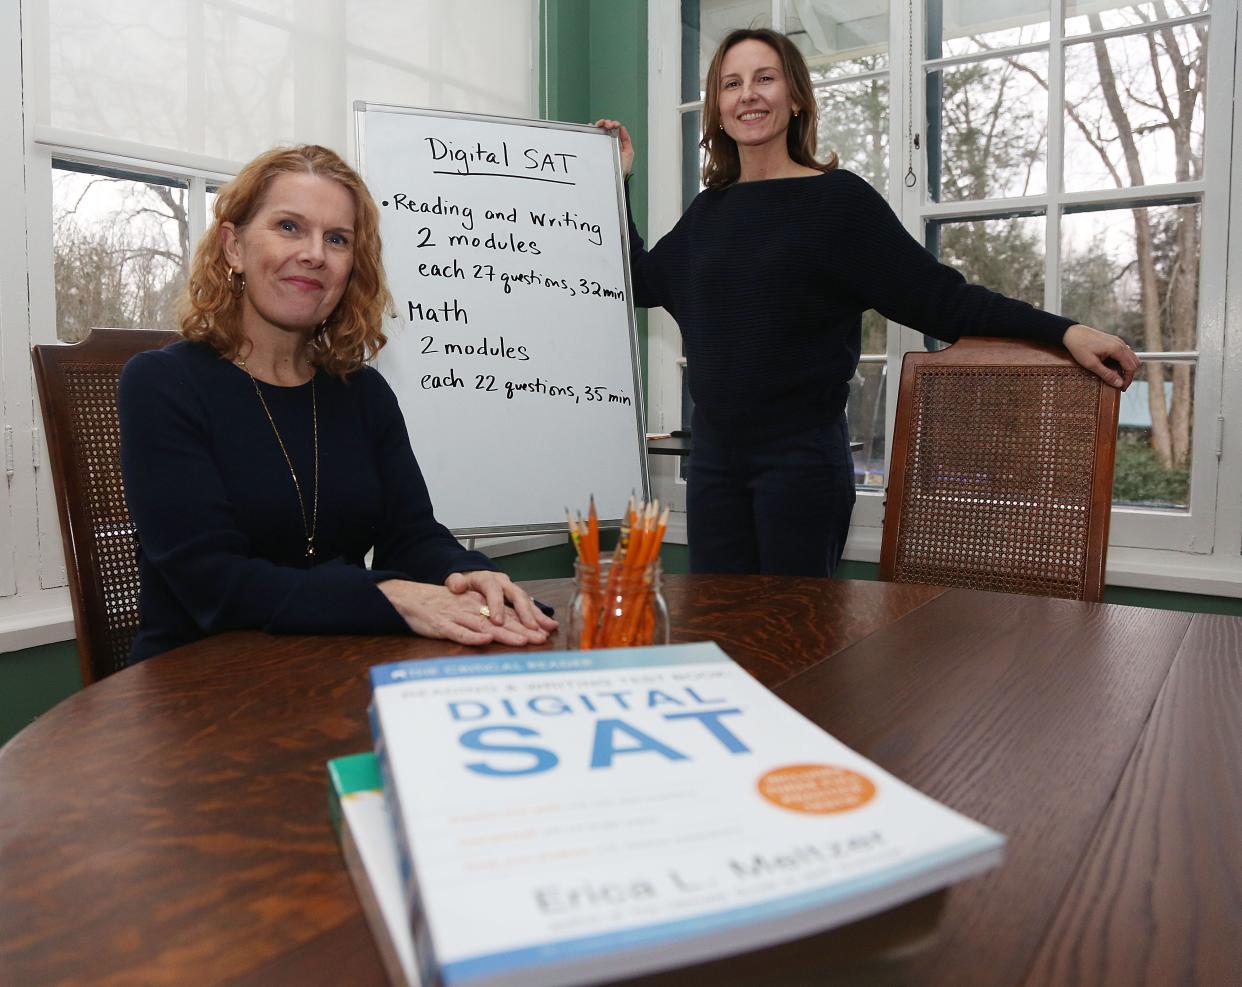 Meaghan Ozaydin and Sarah Burton are co-owners of Aspen Tutoring in Ridgewood. They prepare students for the new digital SAT exam.